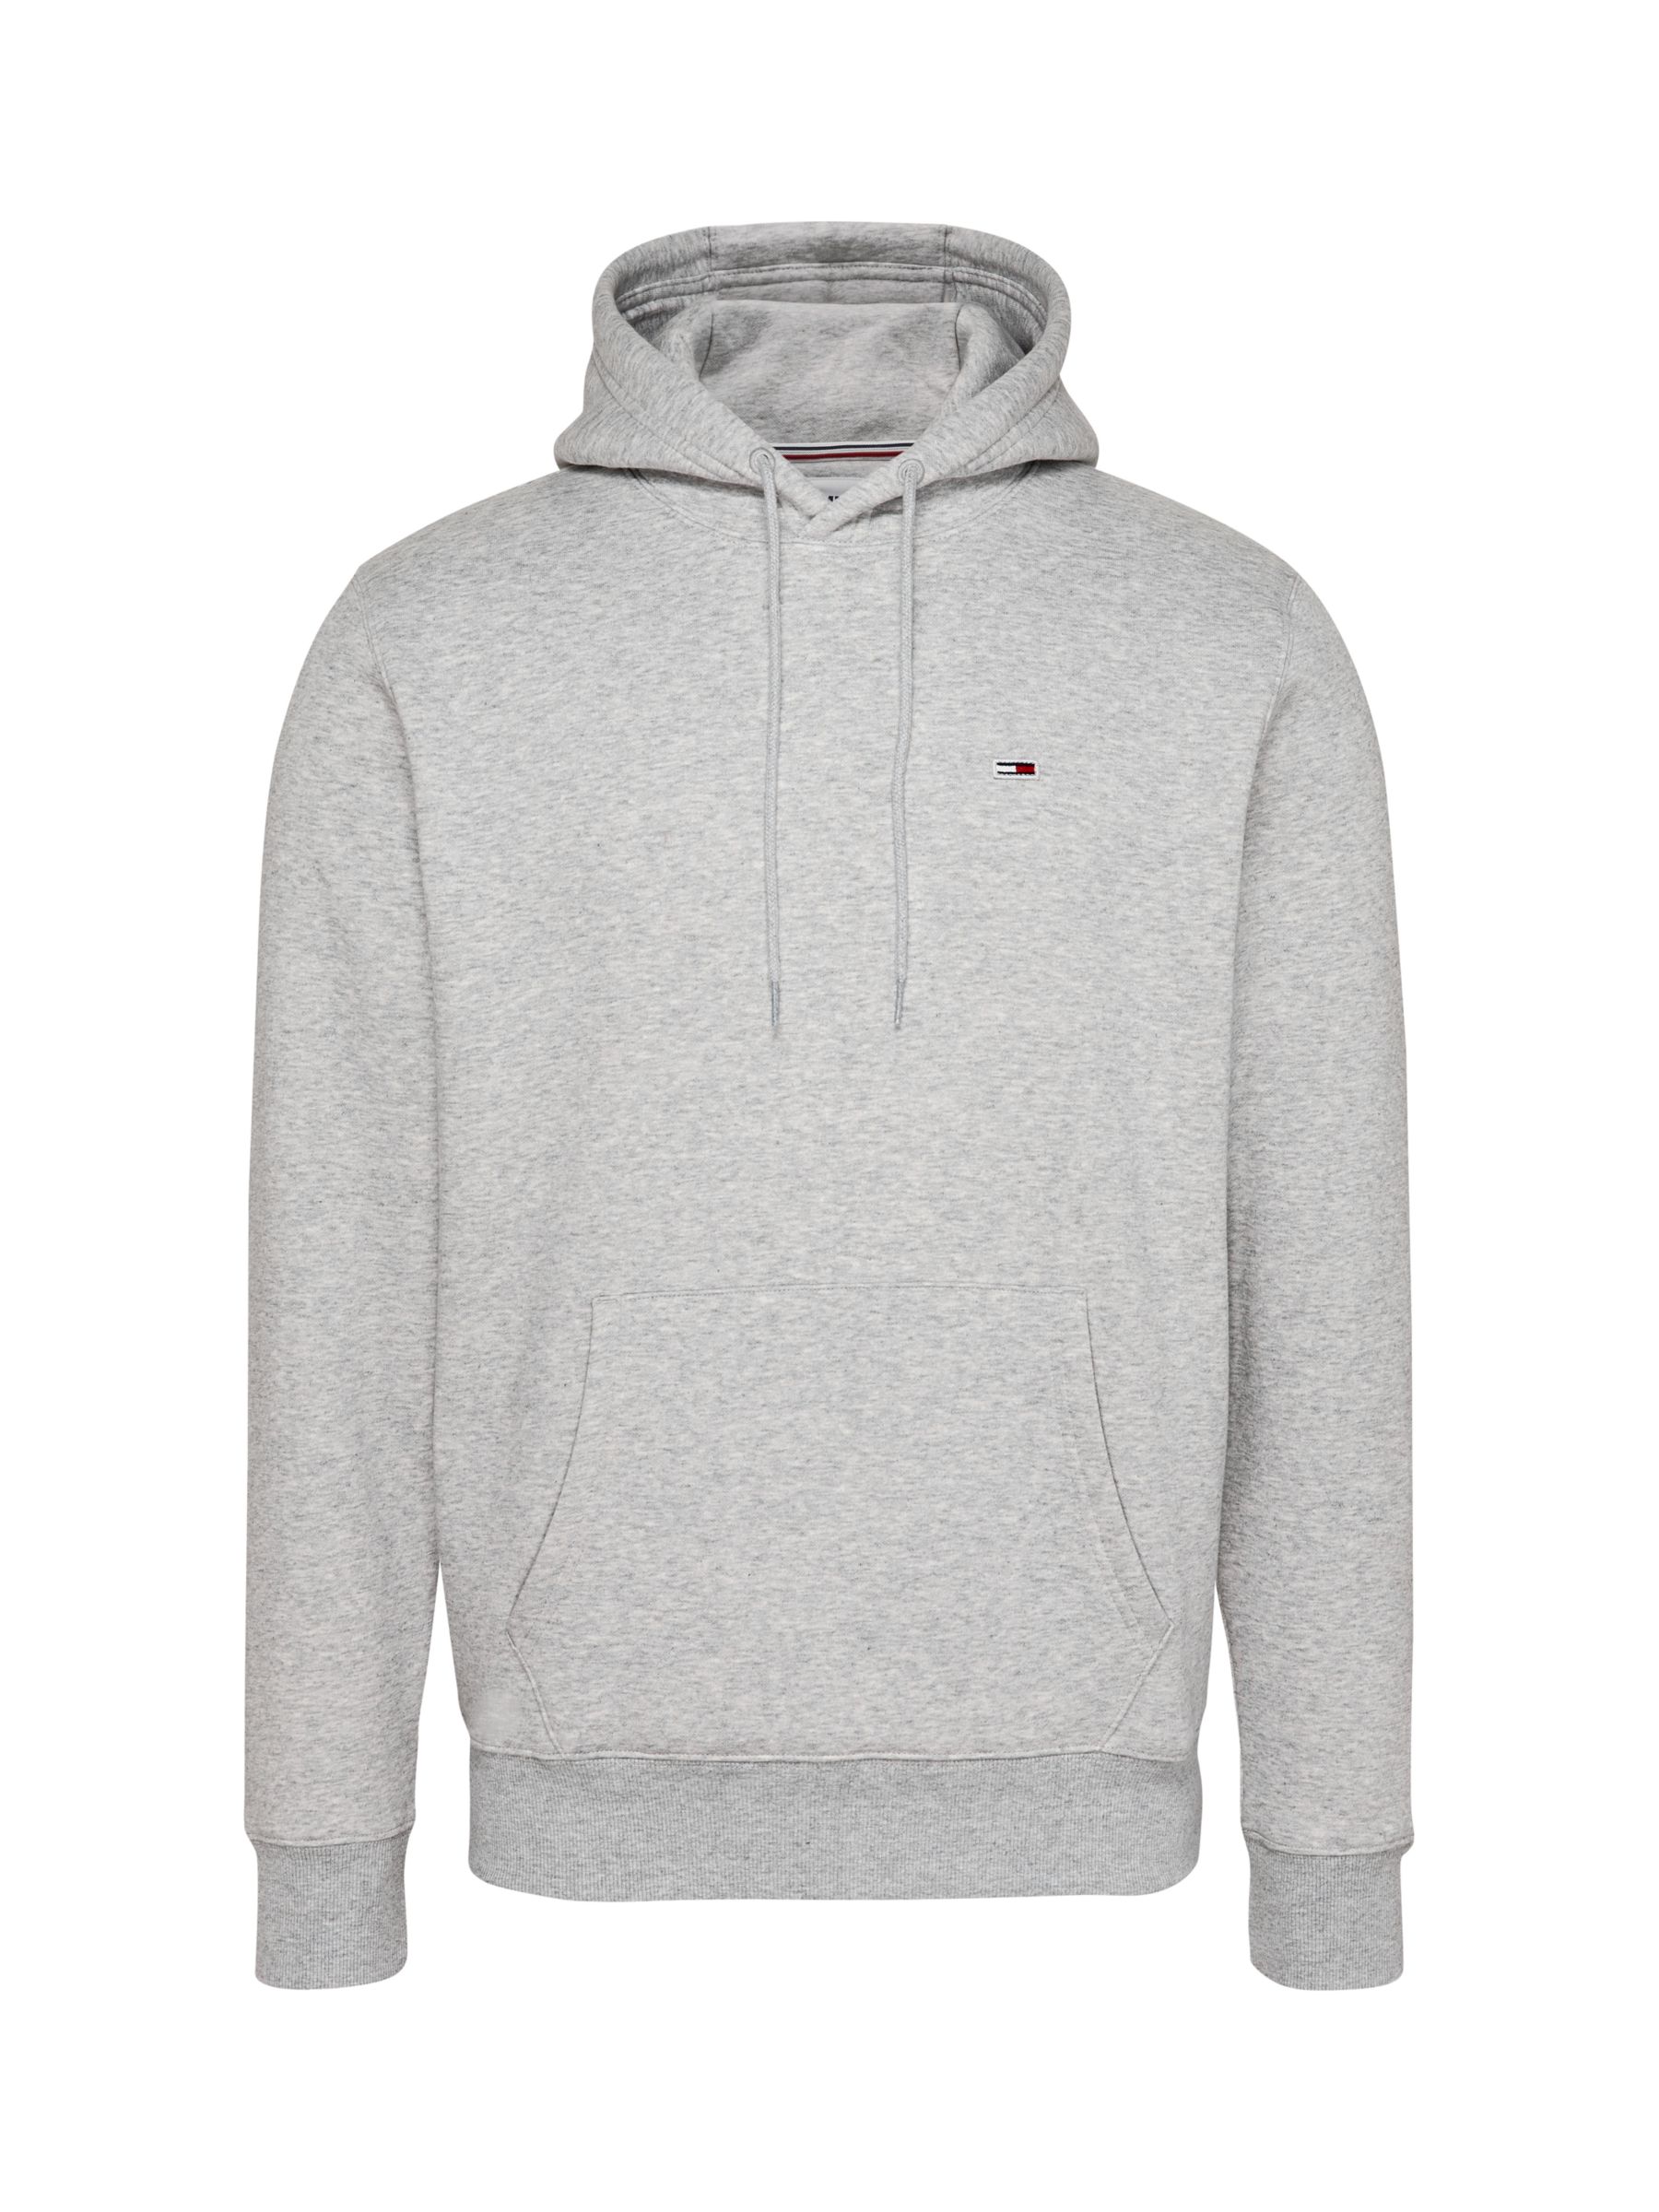 Tommy Hilfiger Small Flag Hoodie, Light Grey at John Lewis & Partners